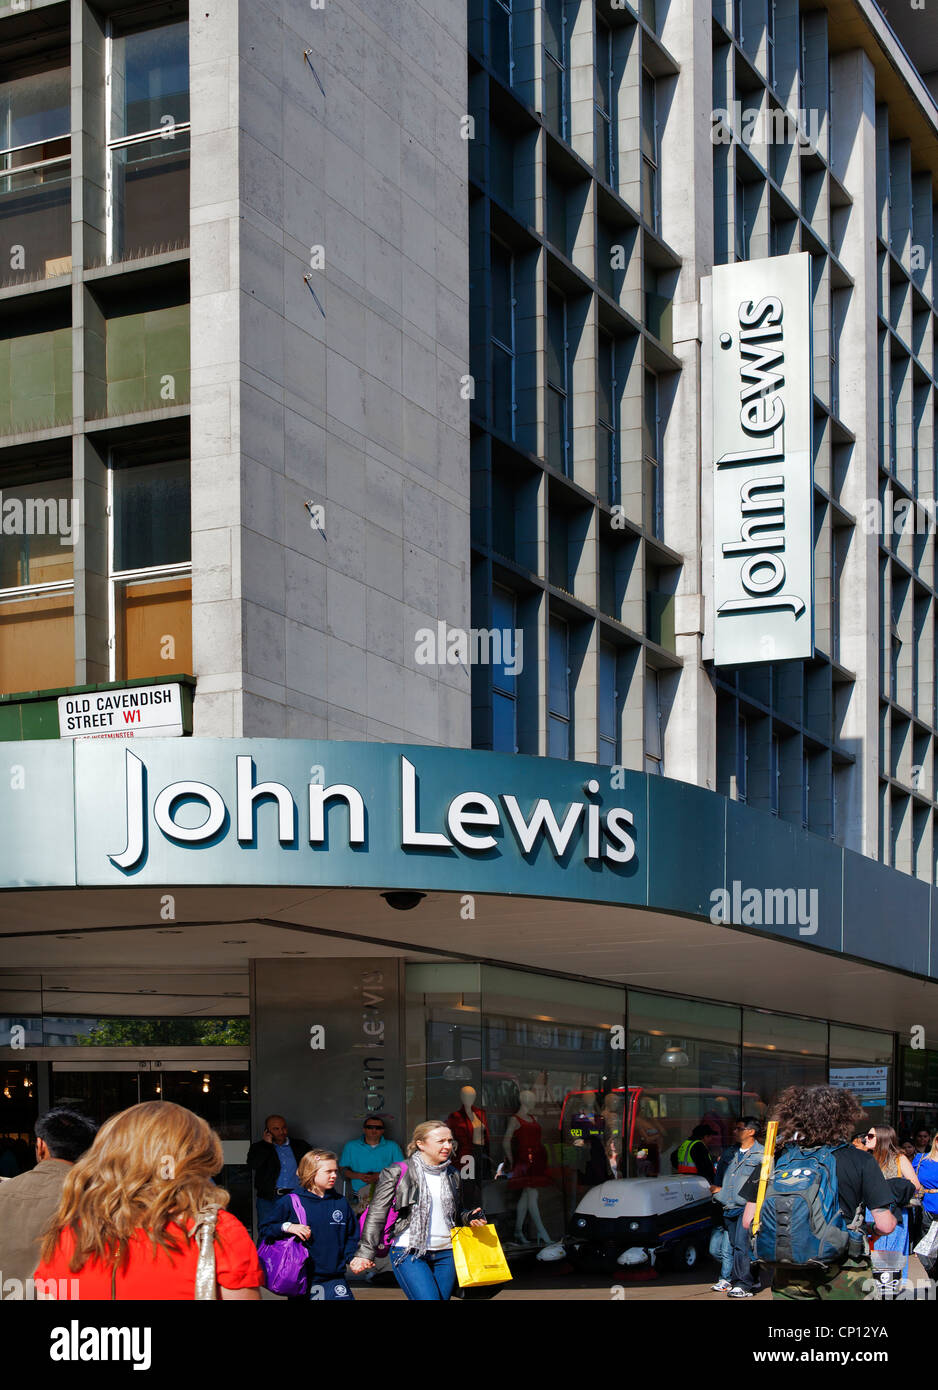 John Lewis Department Store, Shoppers, Oxford Street, Londres, Angleterre, Royaume-Uni, Europe Banque D'Images